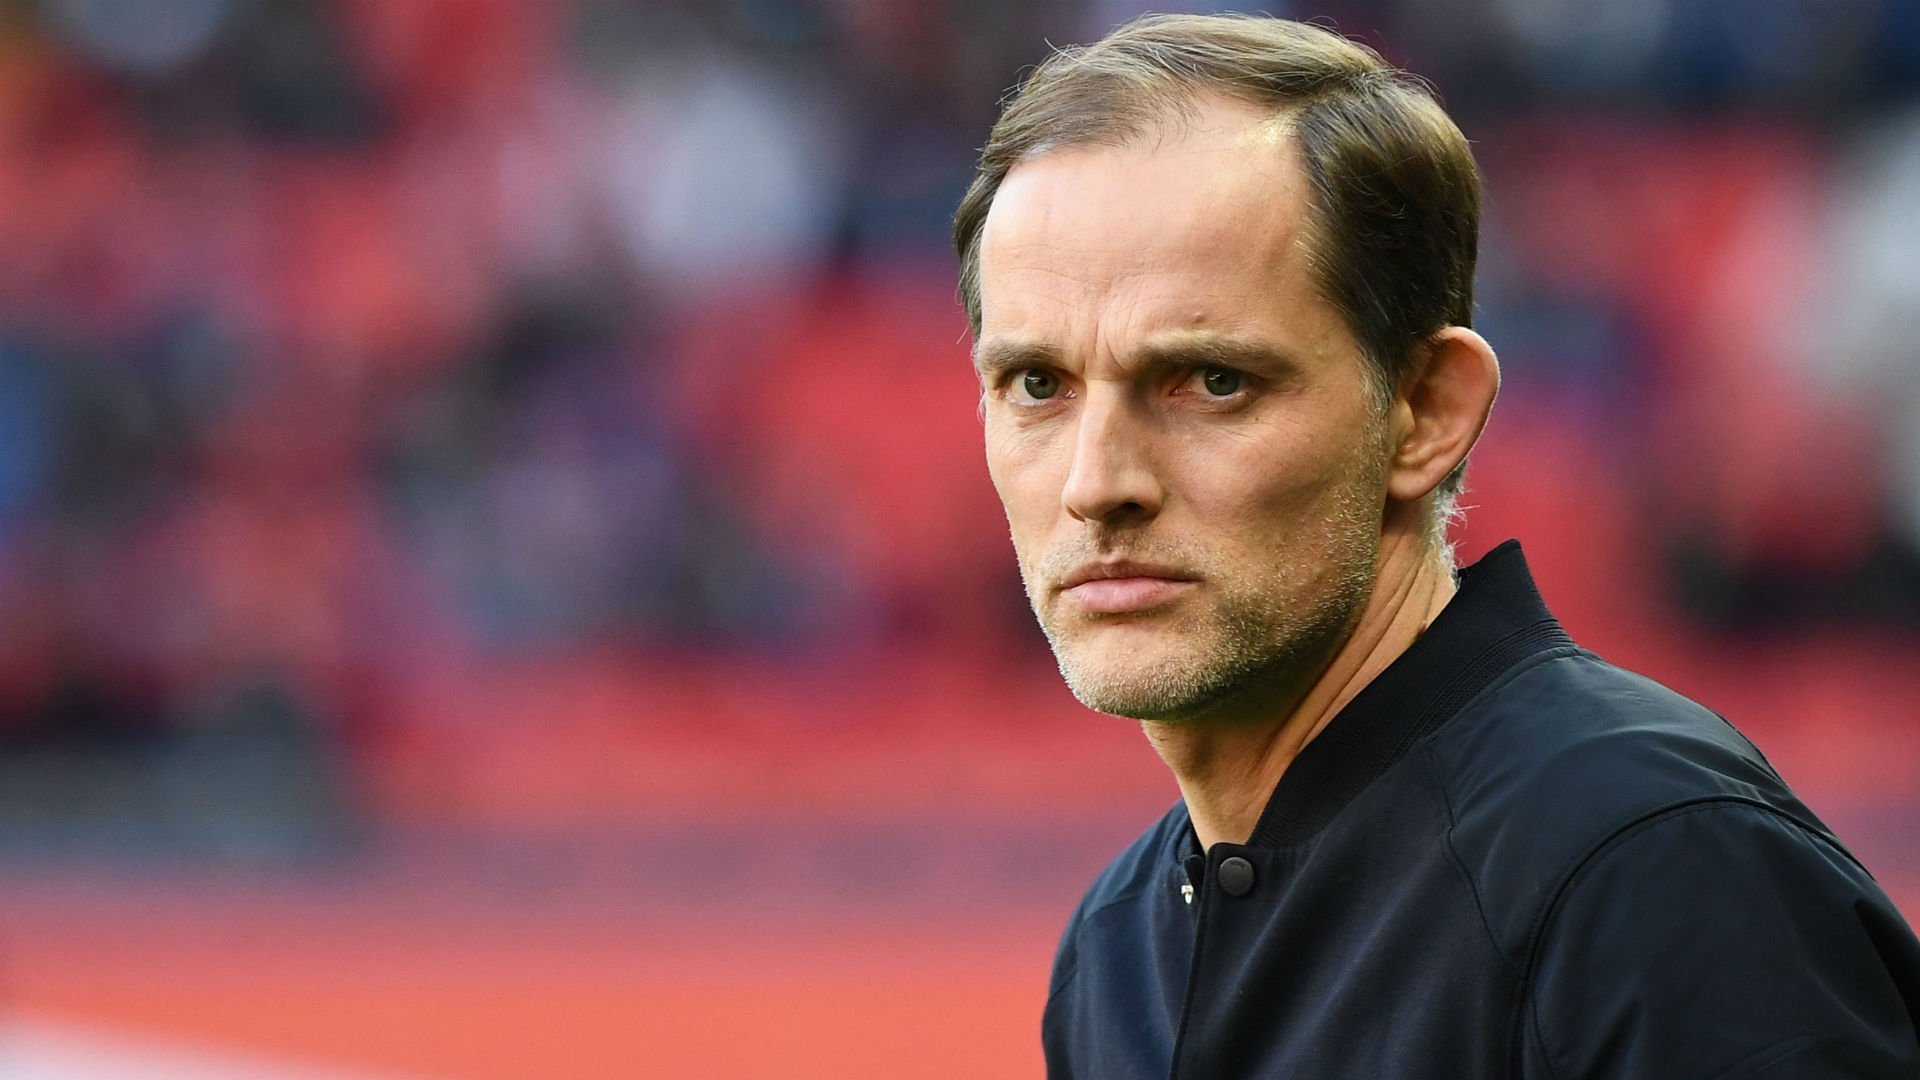 Thomas Tuchel after Manchester United transfer target